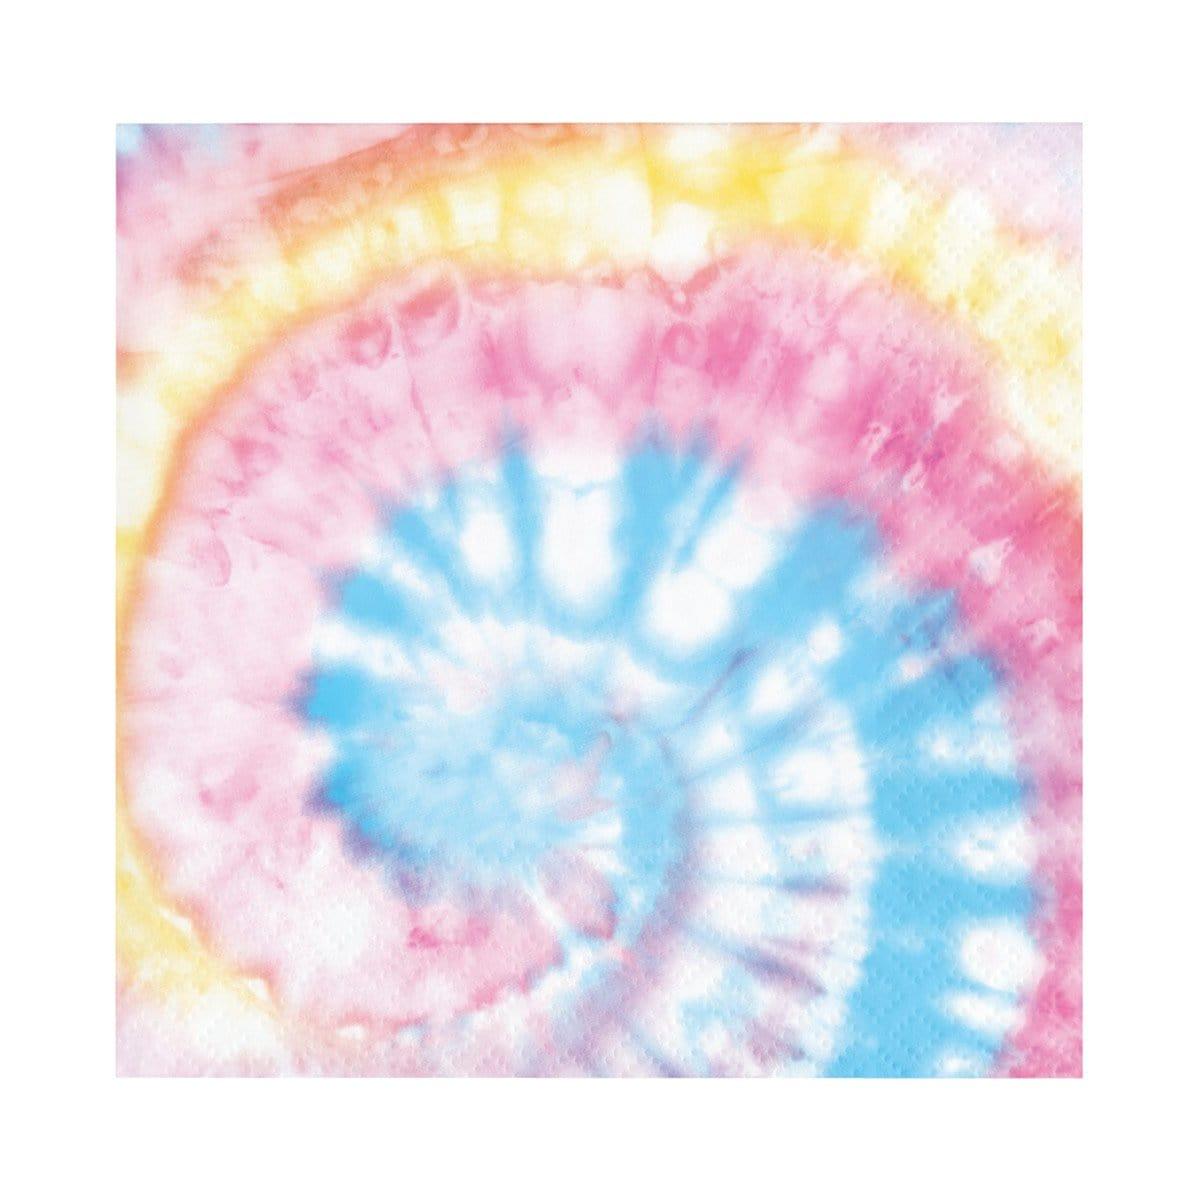 Buy Kids Birthday Tie Dye Party Beverage Napkins, 16 Count sold at Party Expert